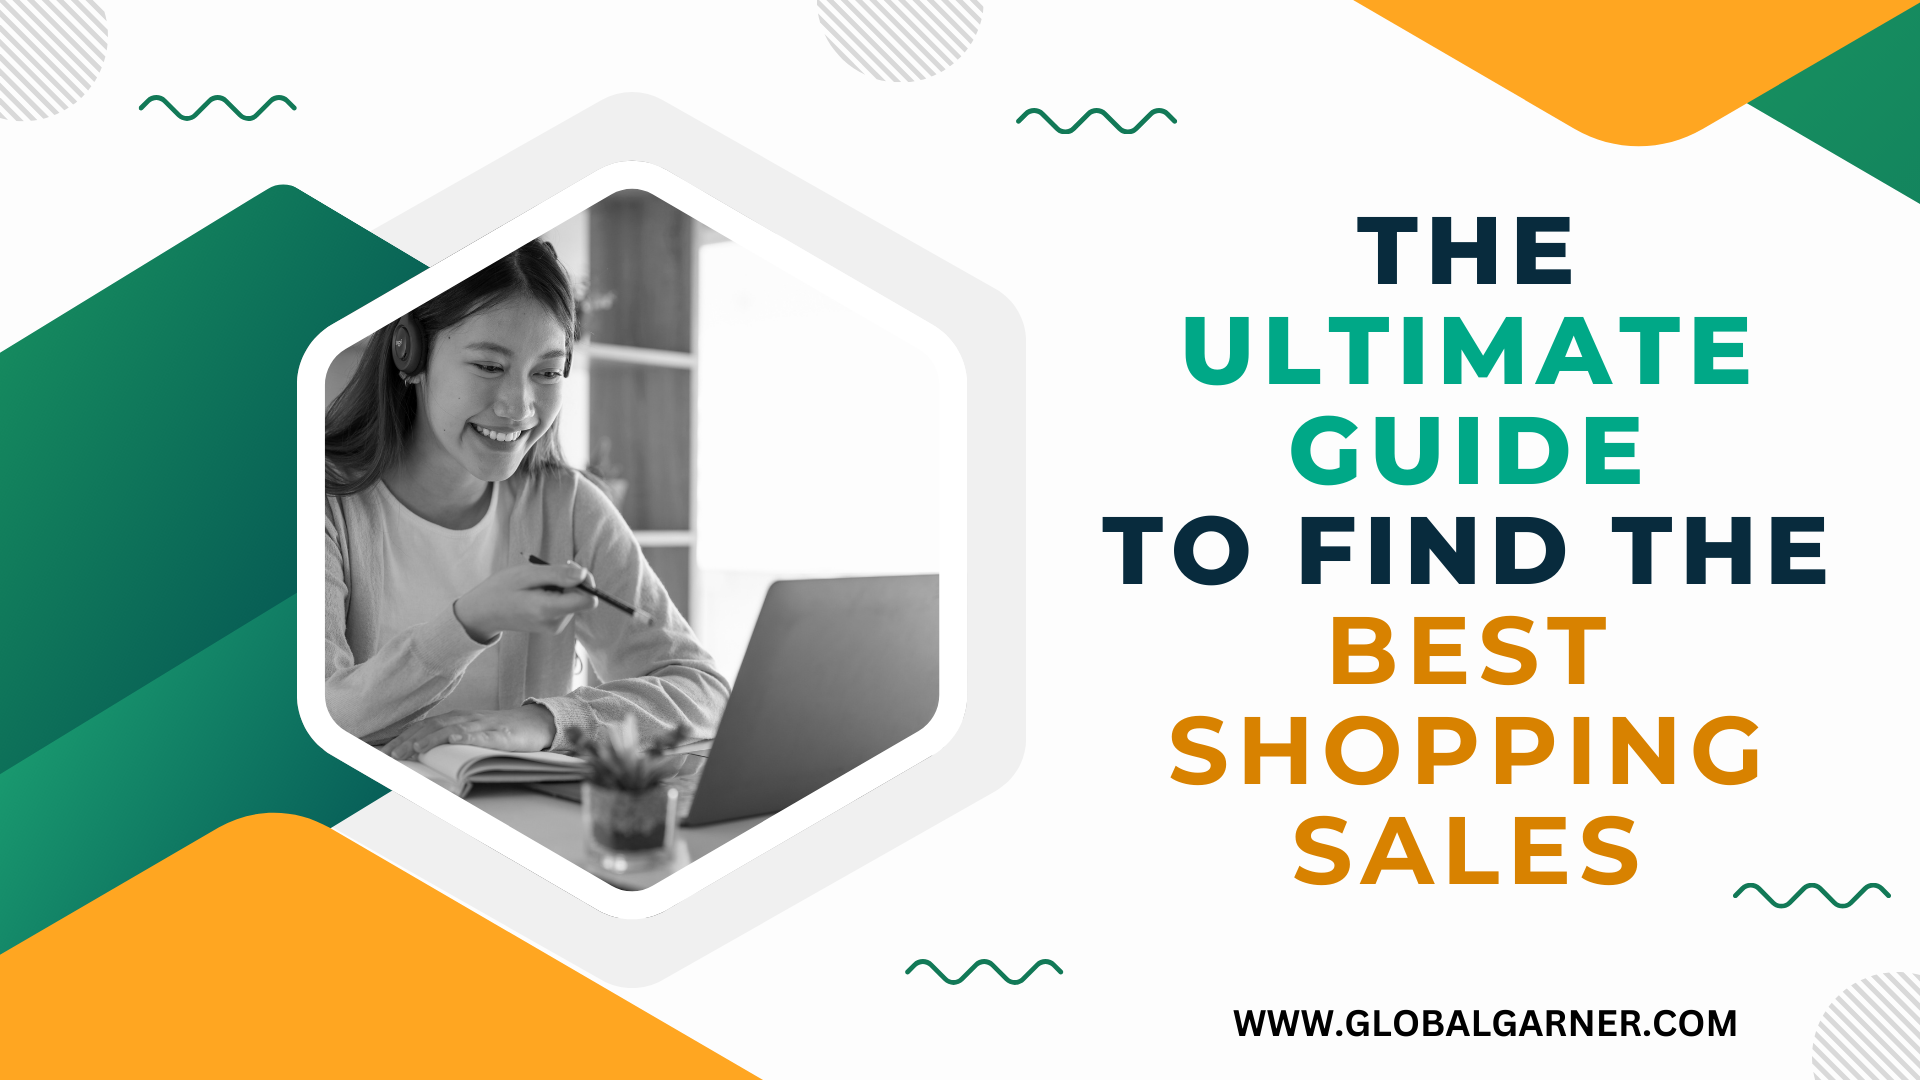 The Ultimate Guide to Find the Best Shopping Sales